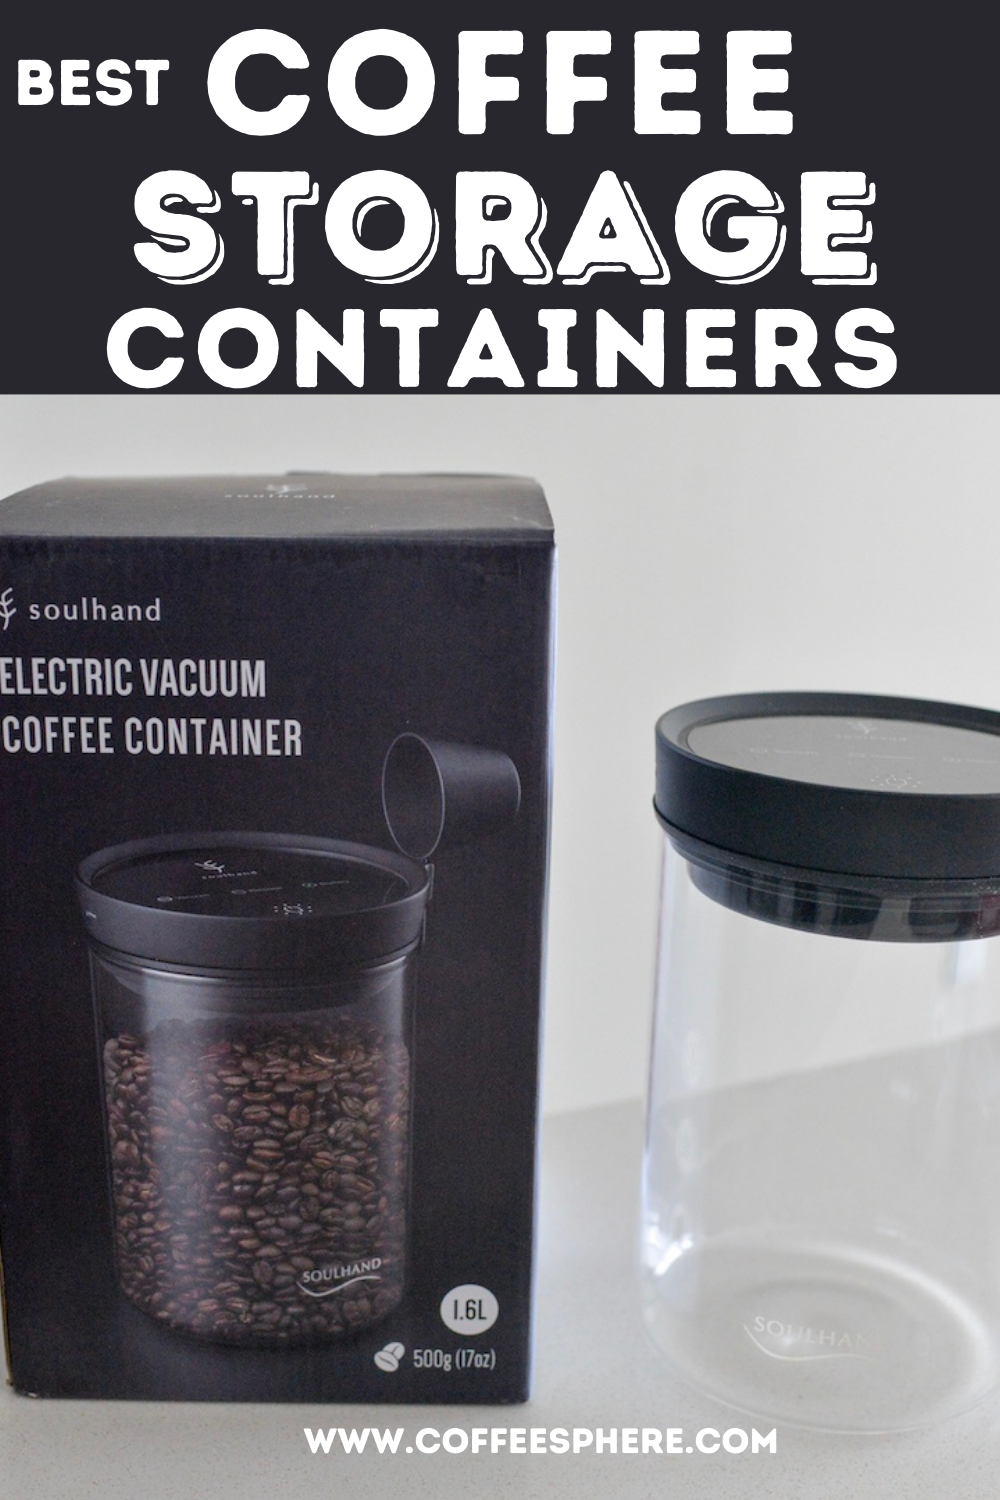 14 Best Coffee Canisters Storage Reviewed by Experts 2018